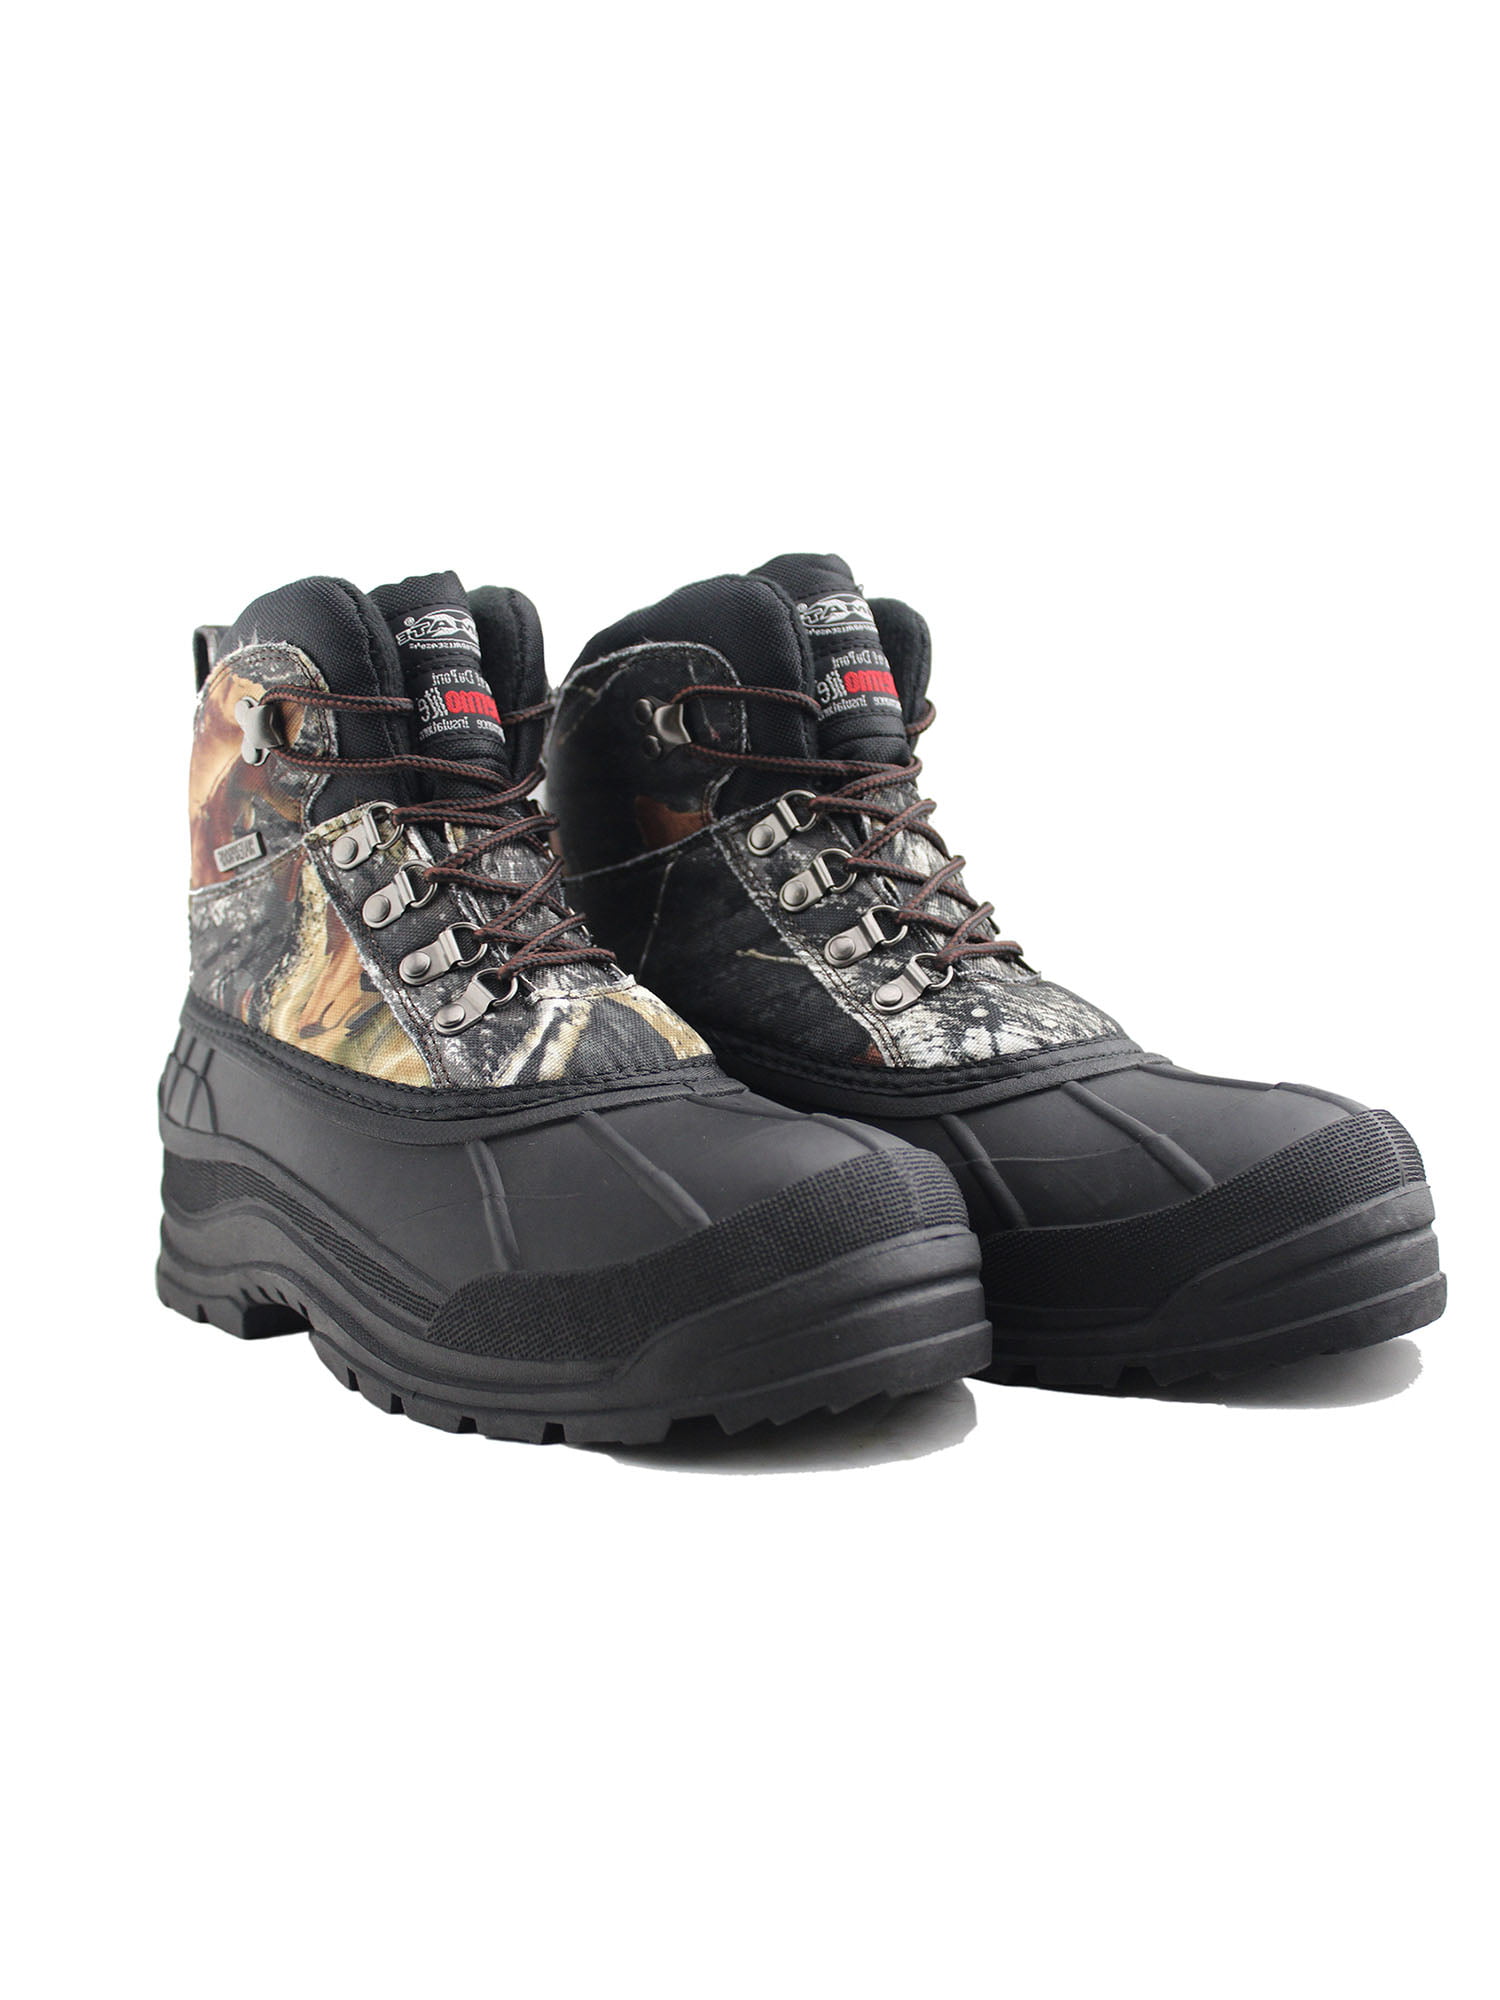 New Men's Winter Snow Boots Camouflage Waterproof Insulated Hunting Thermolite 